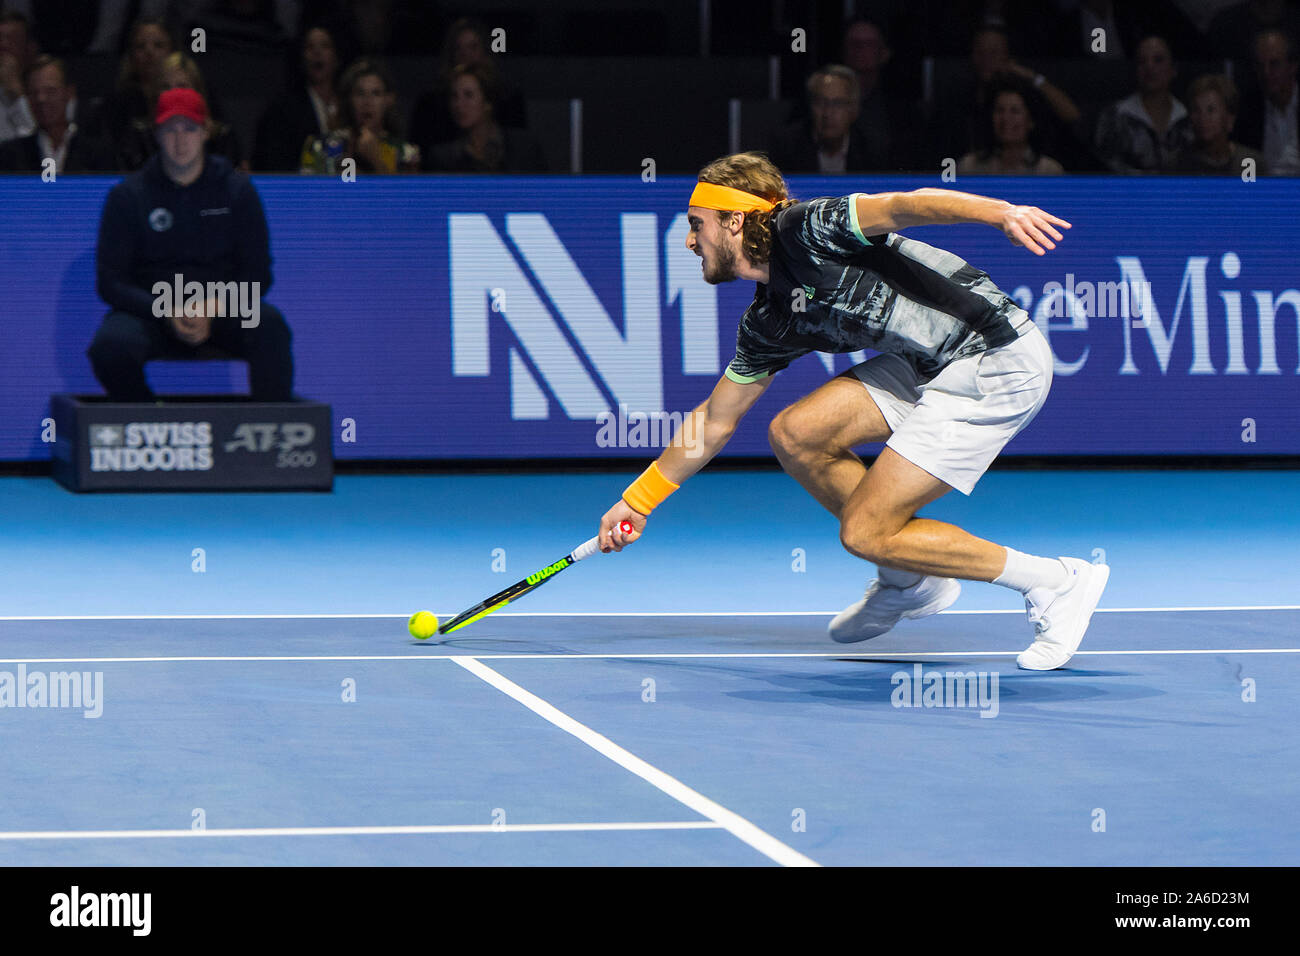 St. Jakobshalle, Basel, Switzerland. 25th Oct, 2019. ATP World Tour Tennis,  Swiss Indoors; Stefanos Tsitsipas (GRE) chases a dropshot in the match  against Filip Krajinovic (SRB) - Editorial Use Credit: Action Plus